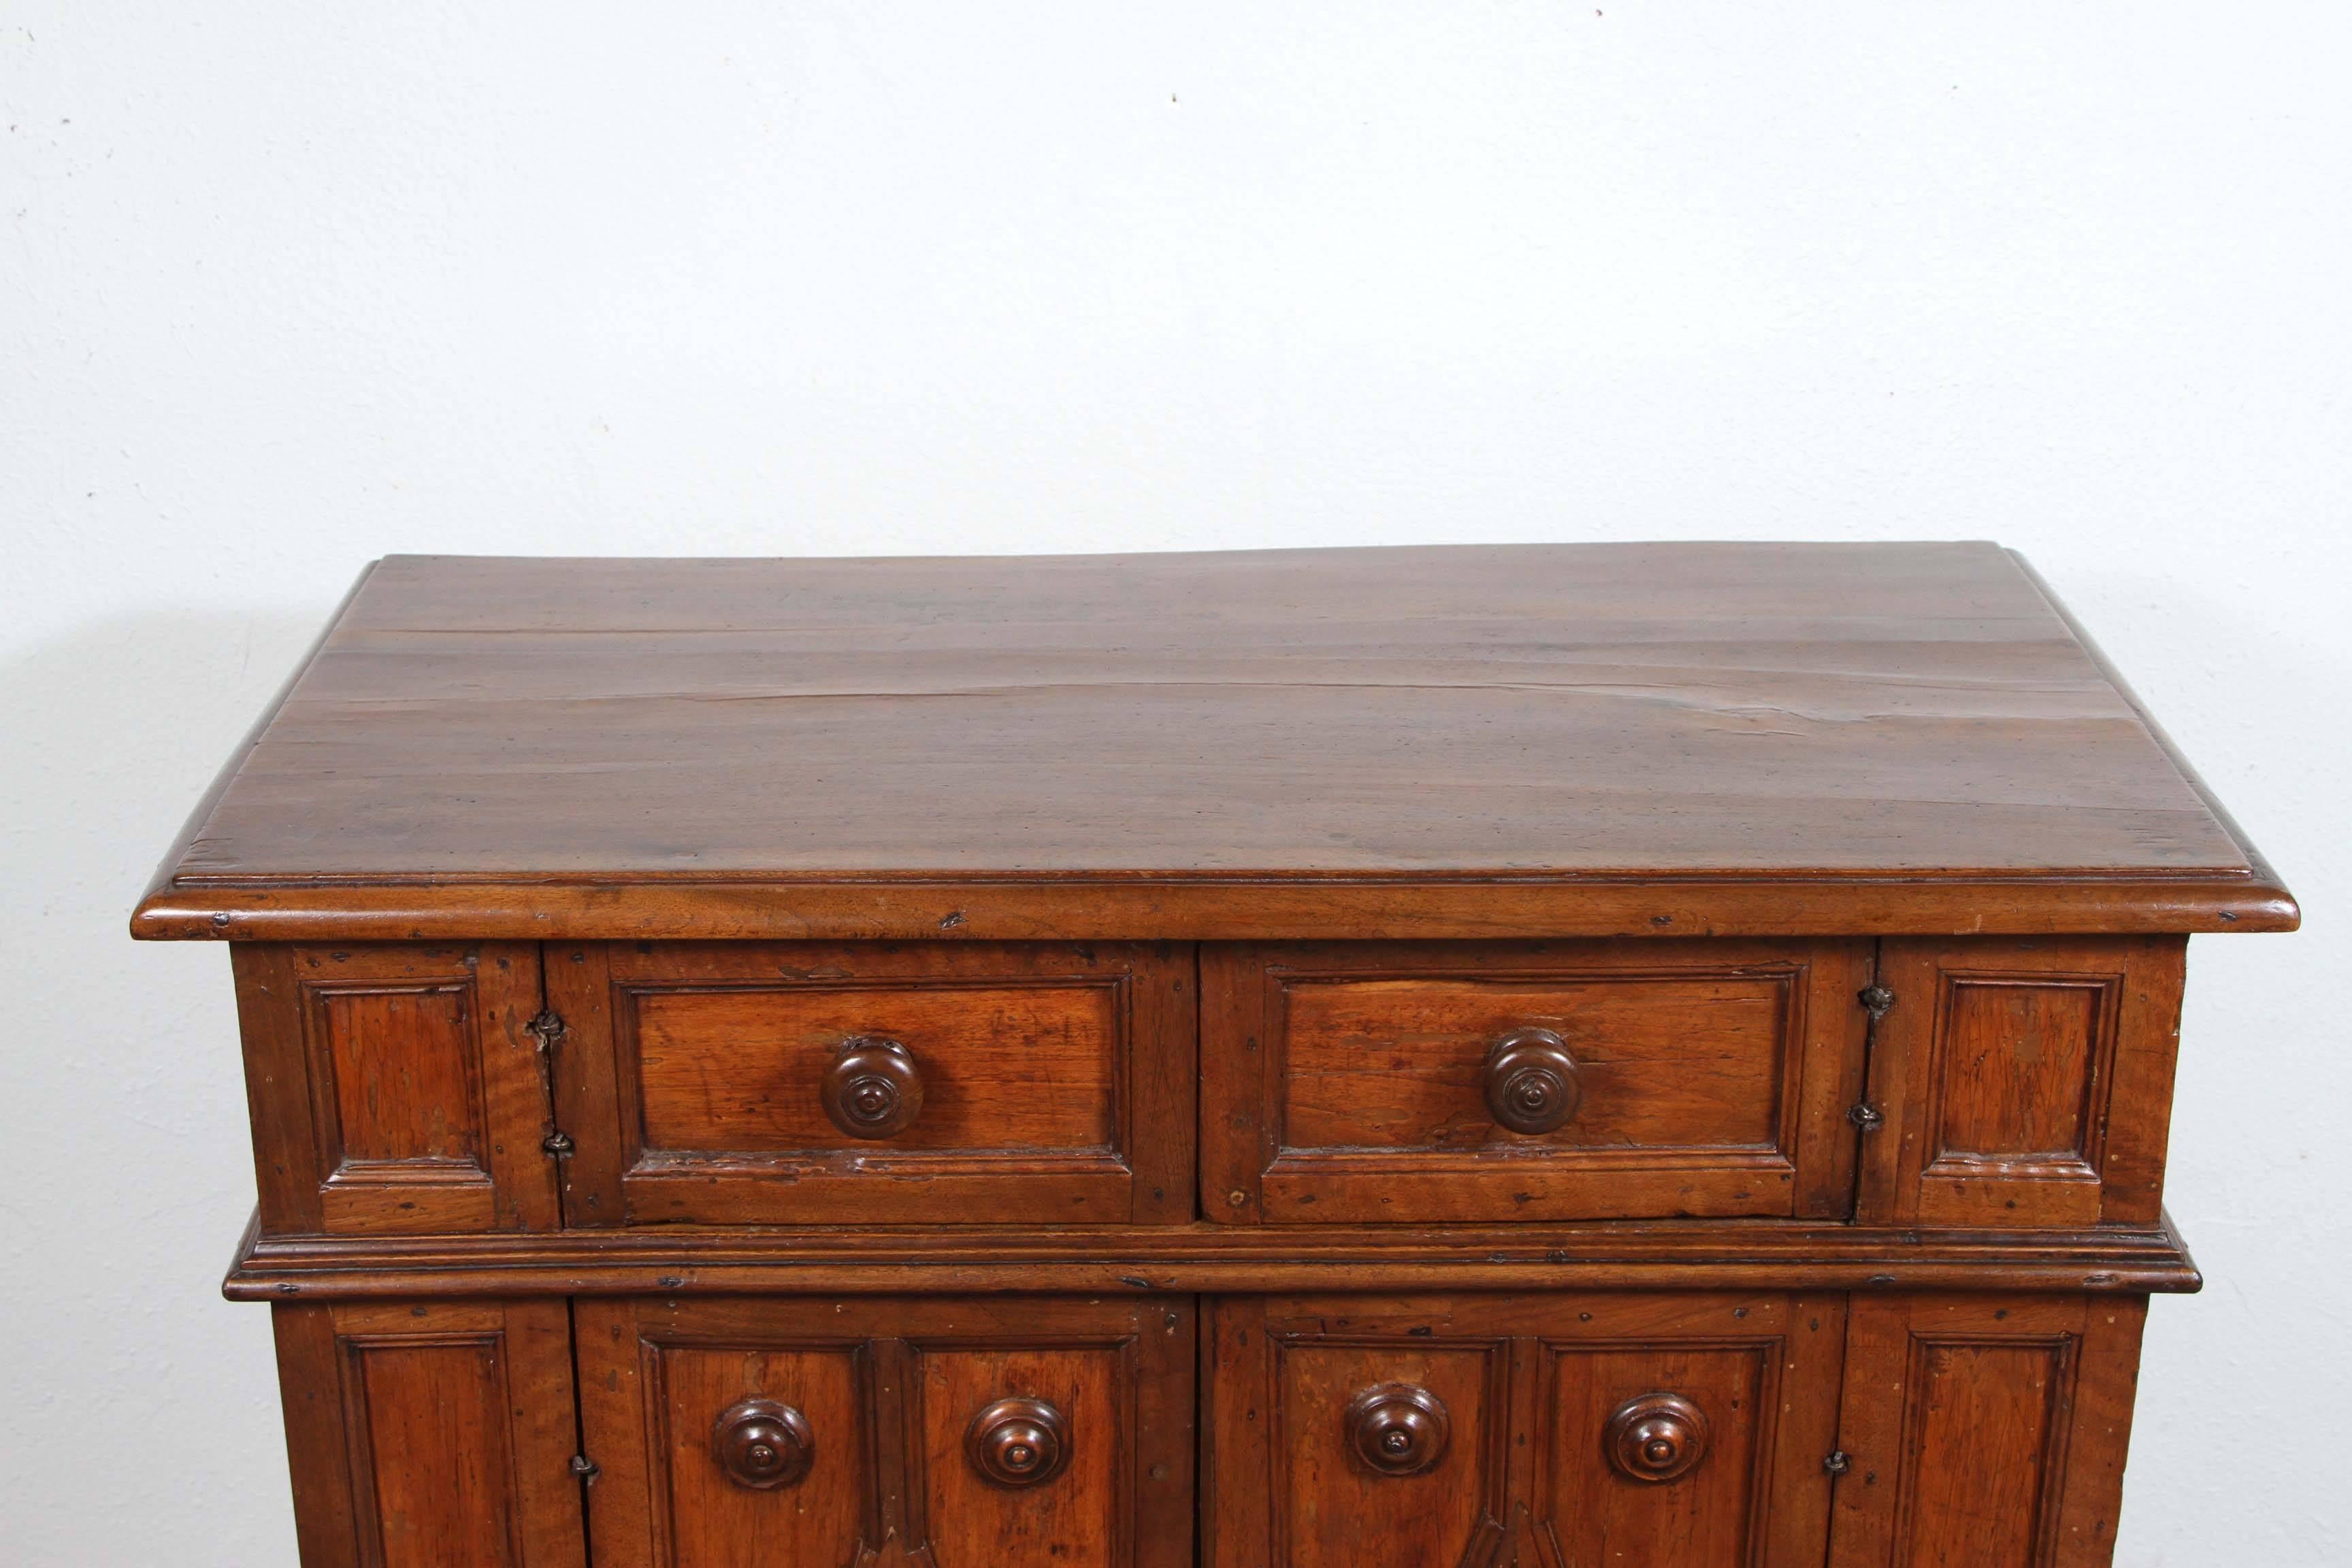 Petite, hand-carved, raised panel, Tuscan credenza on a stepped base.